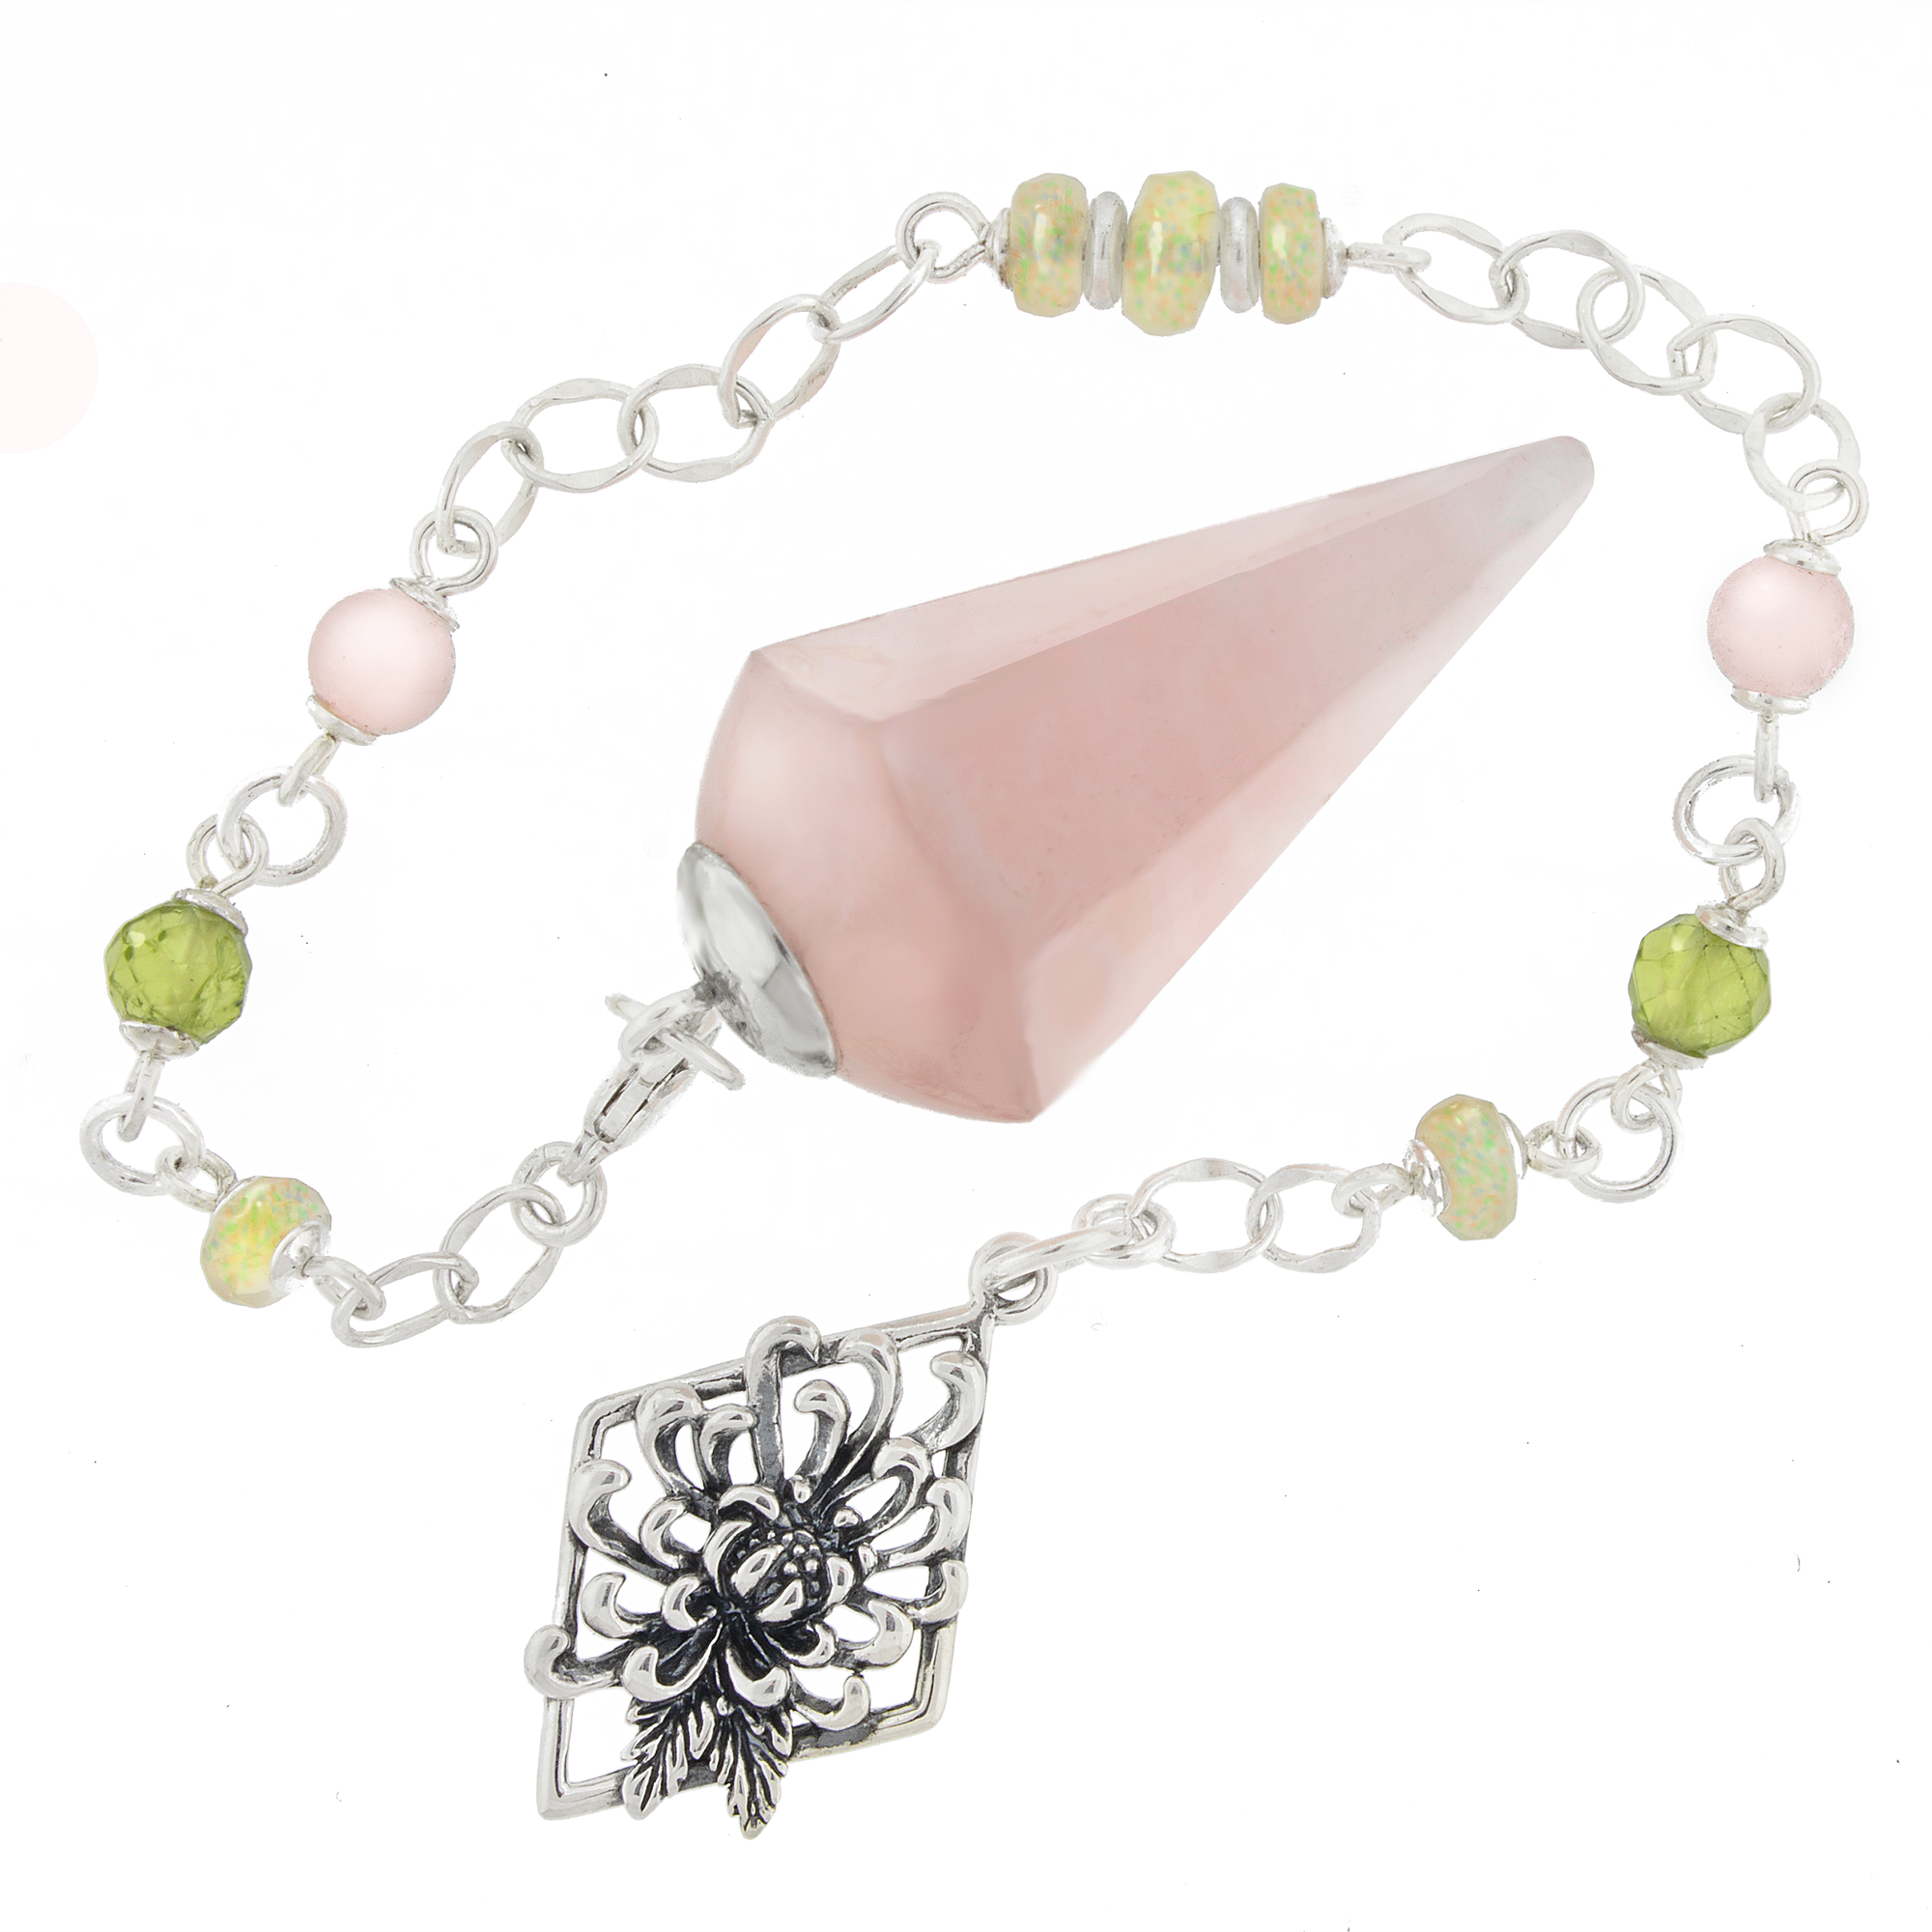 One of a Kind #377 - Rose Quartz, Welo Opal, Peridot and Sterling Silver Pendulum by Ask Your Pendulum